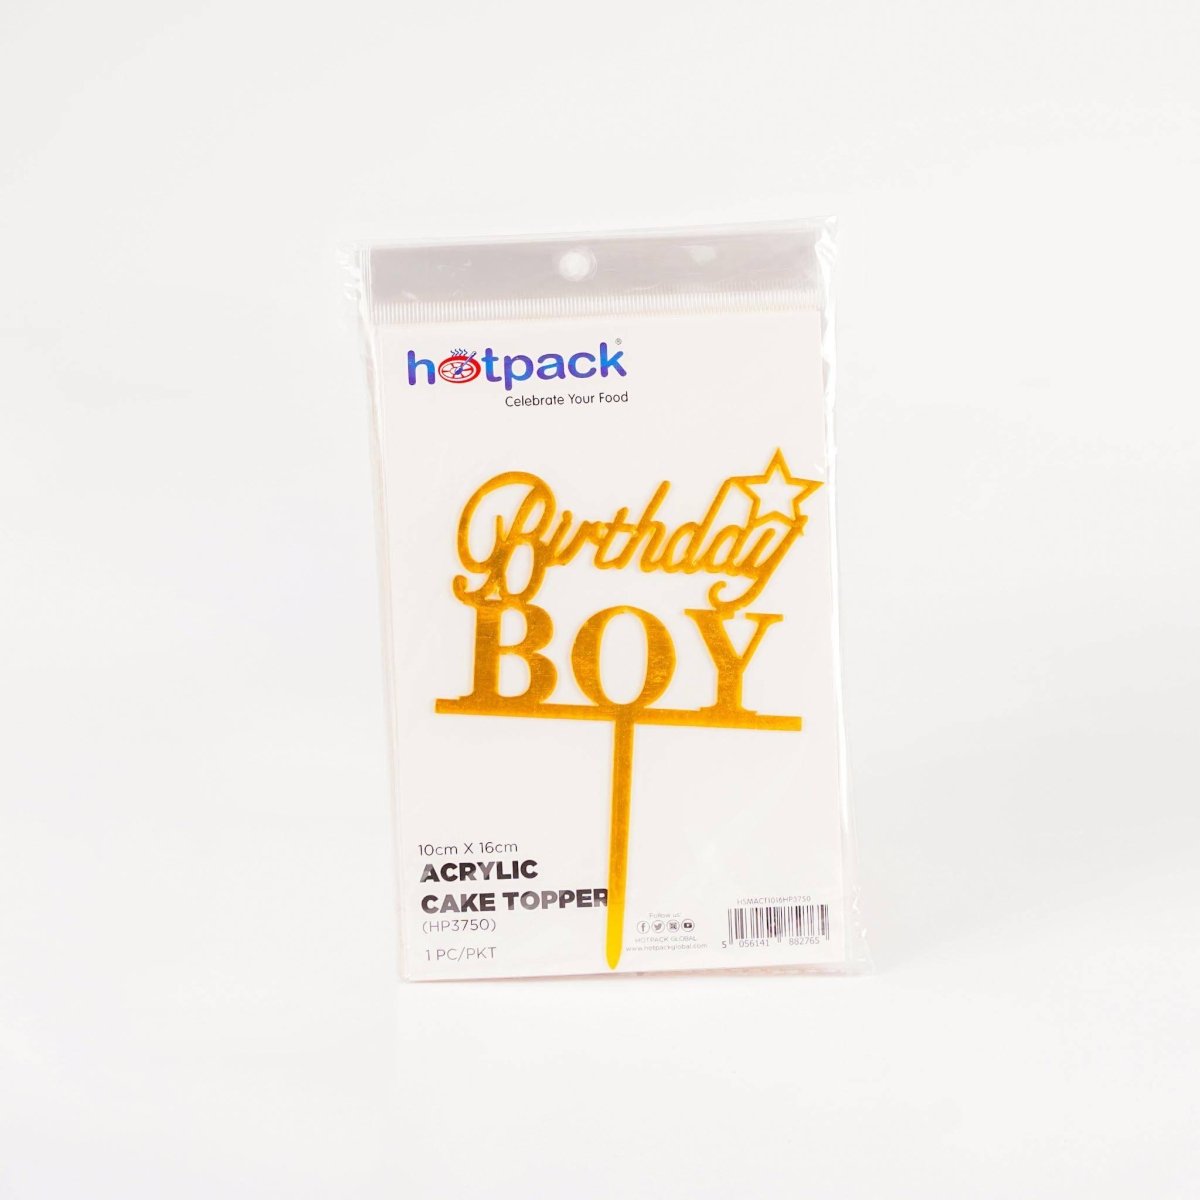 Golden Acrylic Cake Toppers 1 Piece - hotpackwebstore.com - Baking & Decoration